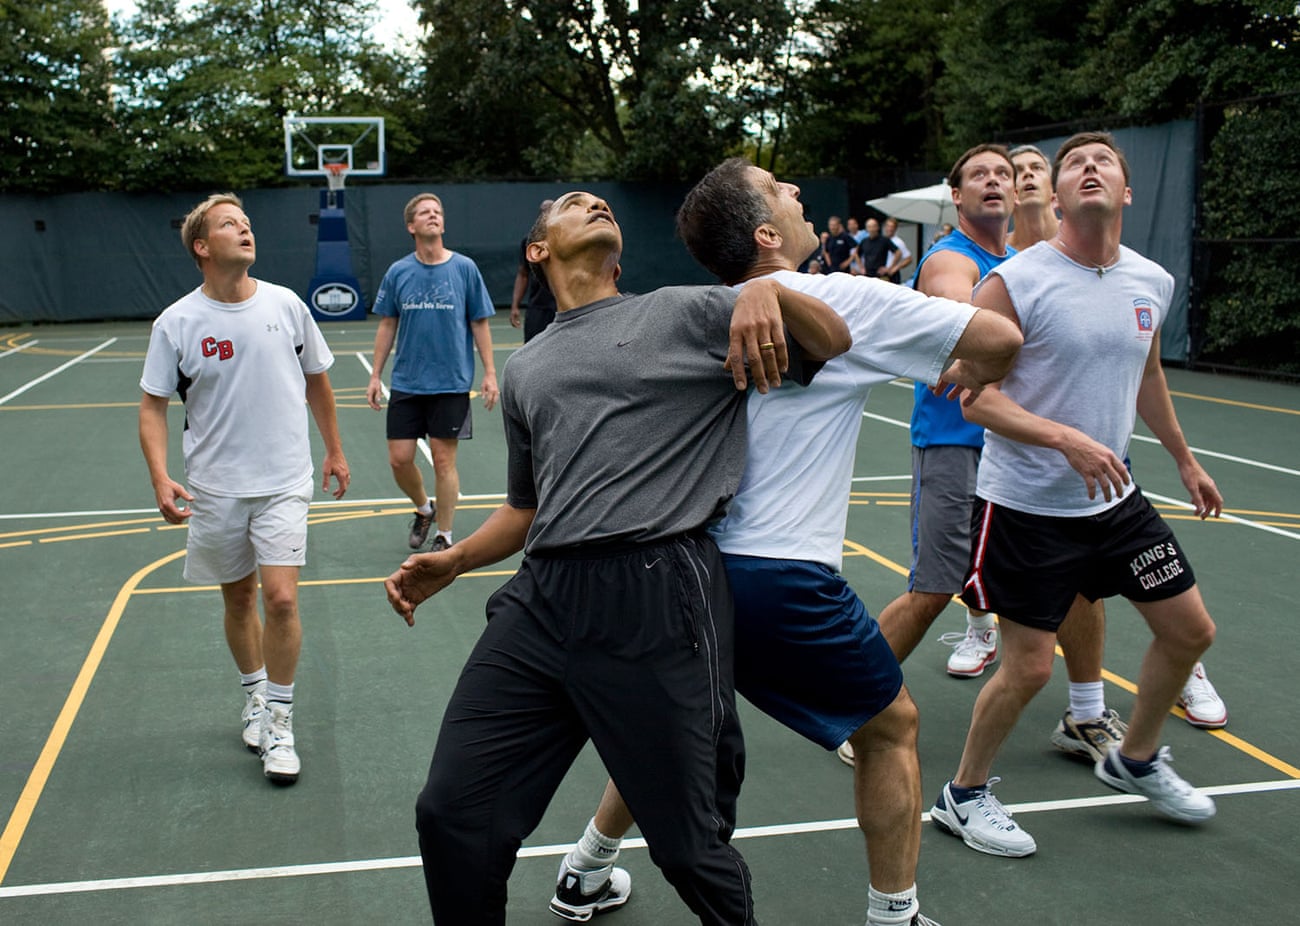 The president jostles with congressmen during a basketball game at the White House